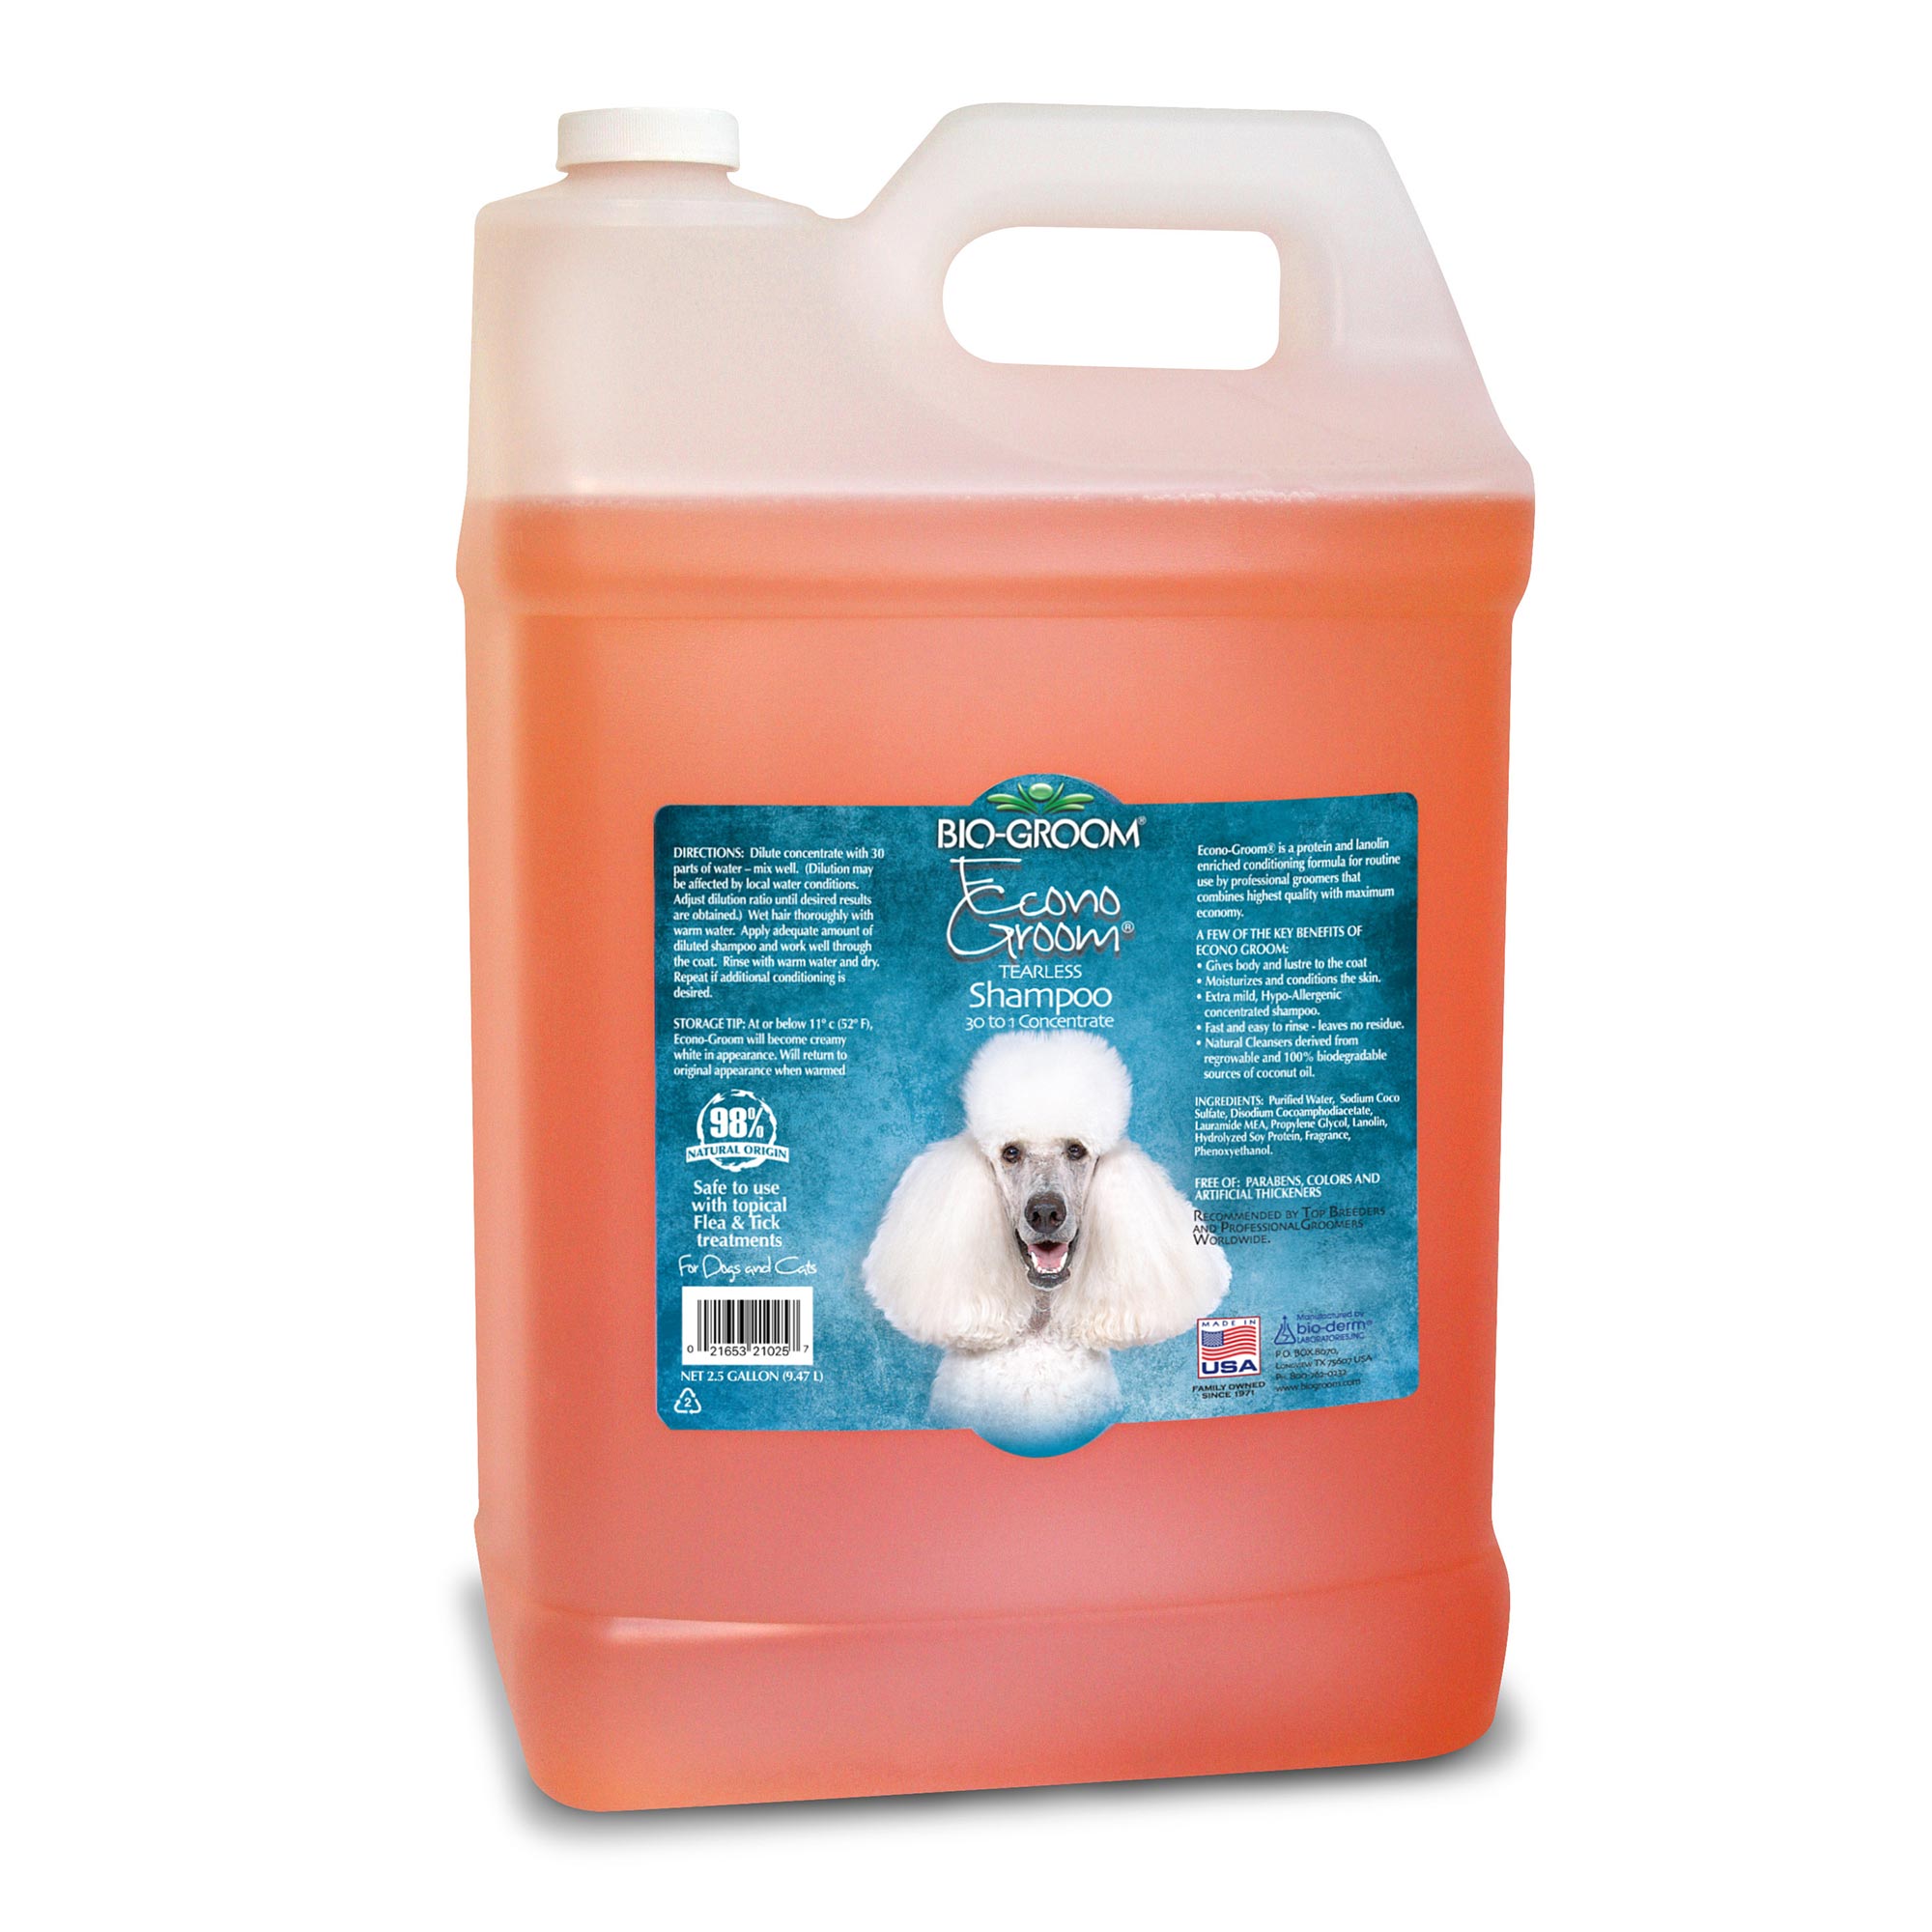 Case Pack - Econo-Groom® Tear-Free Concentrate Dog Shampoo